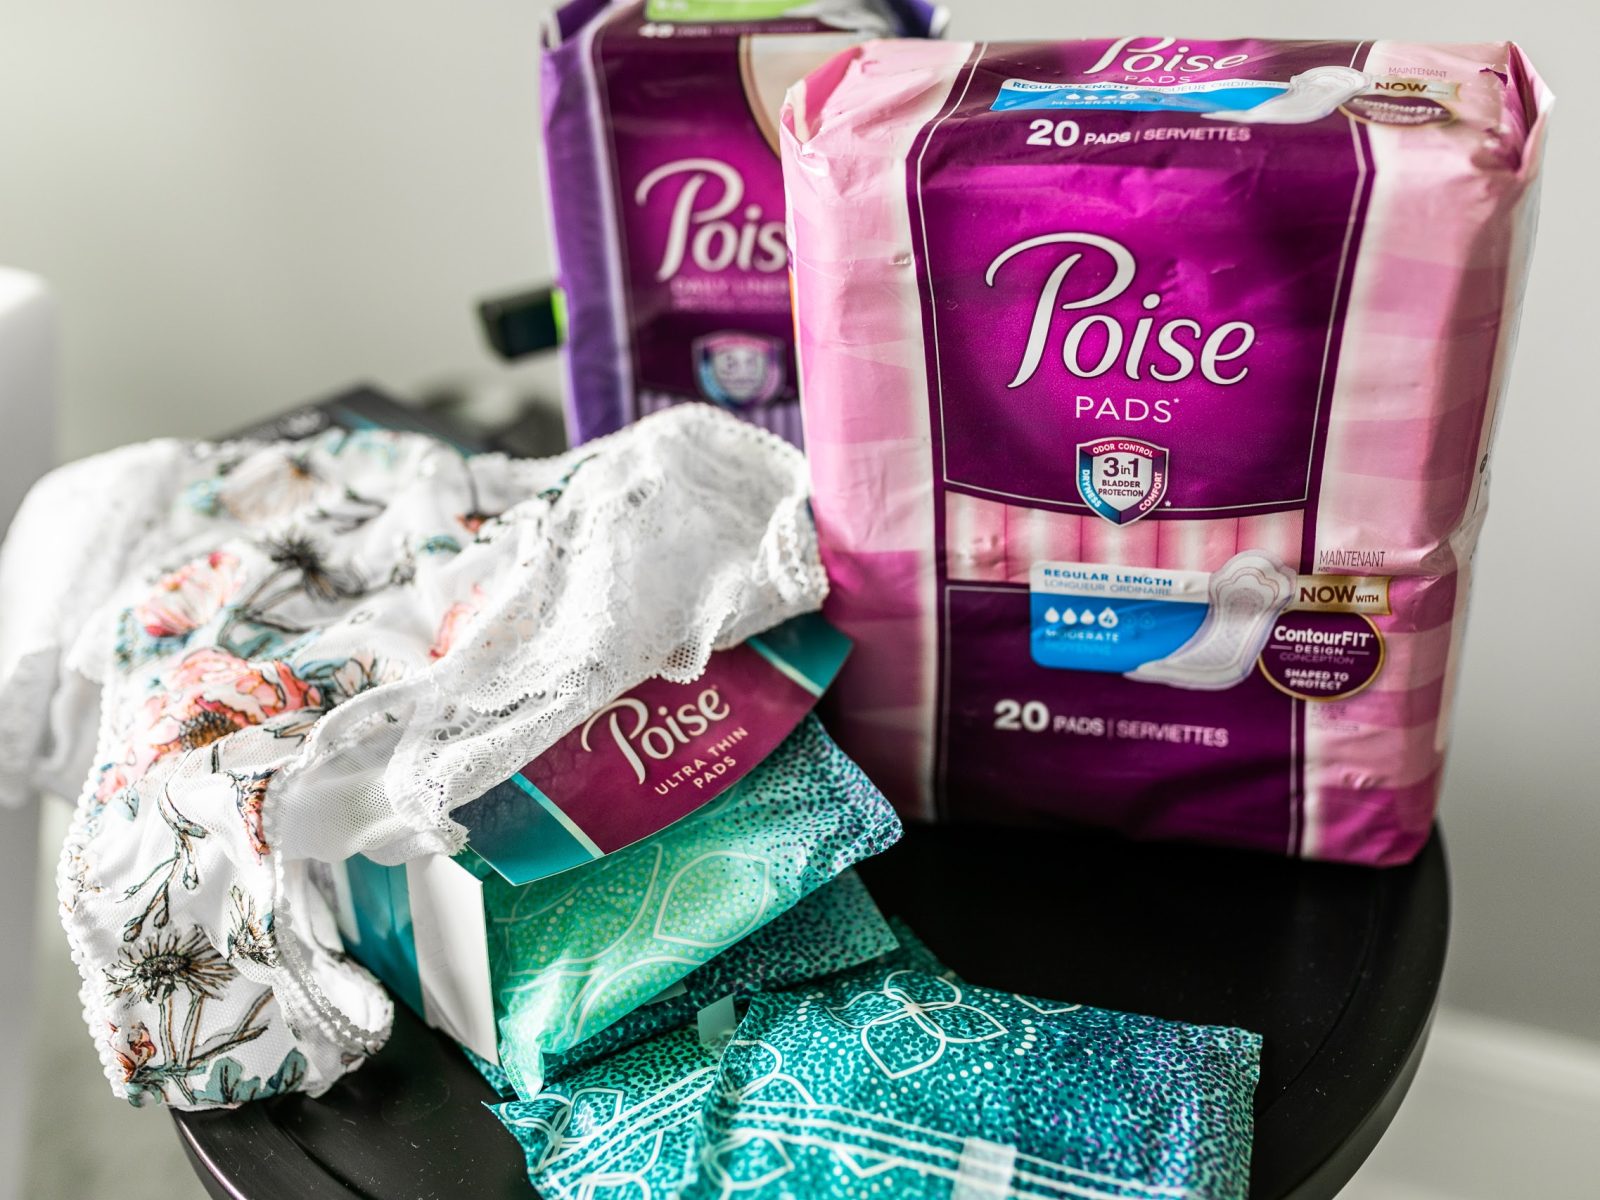 With Poise® You Can Laugh In The Face of Leaks – Save $3 At Publix